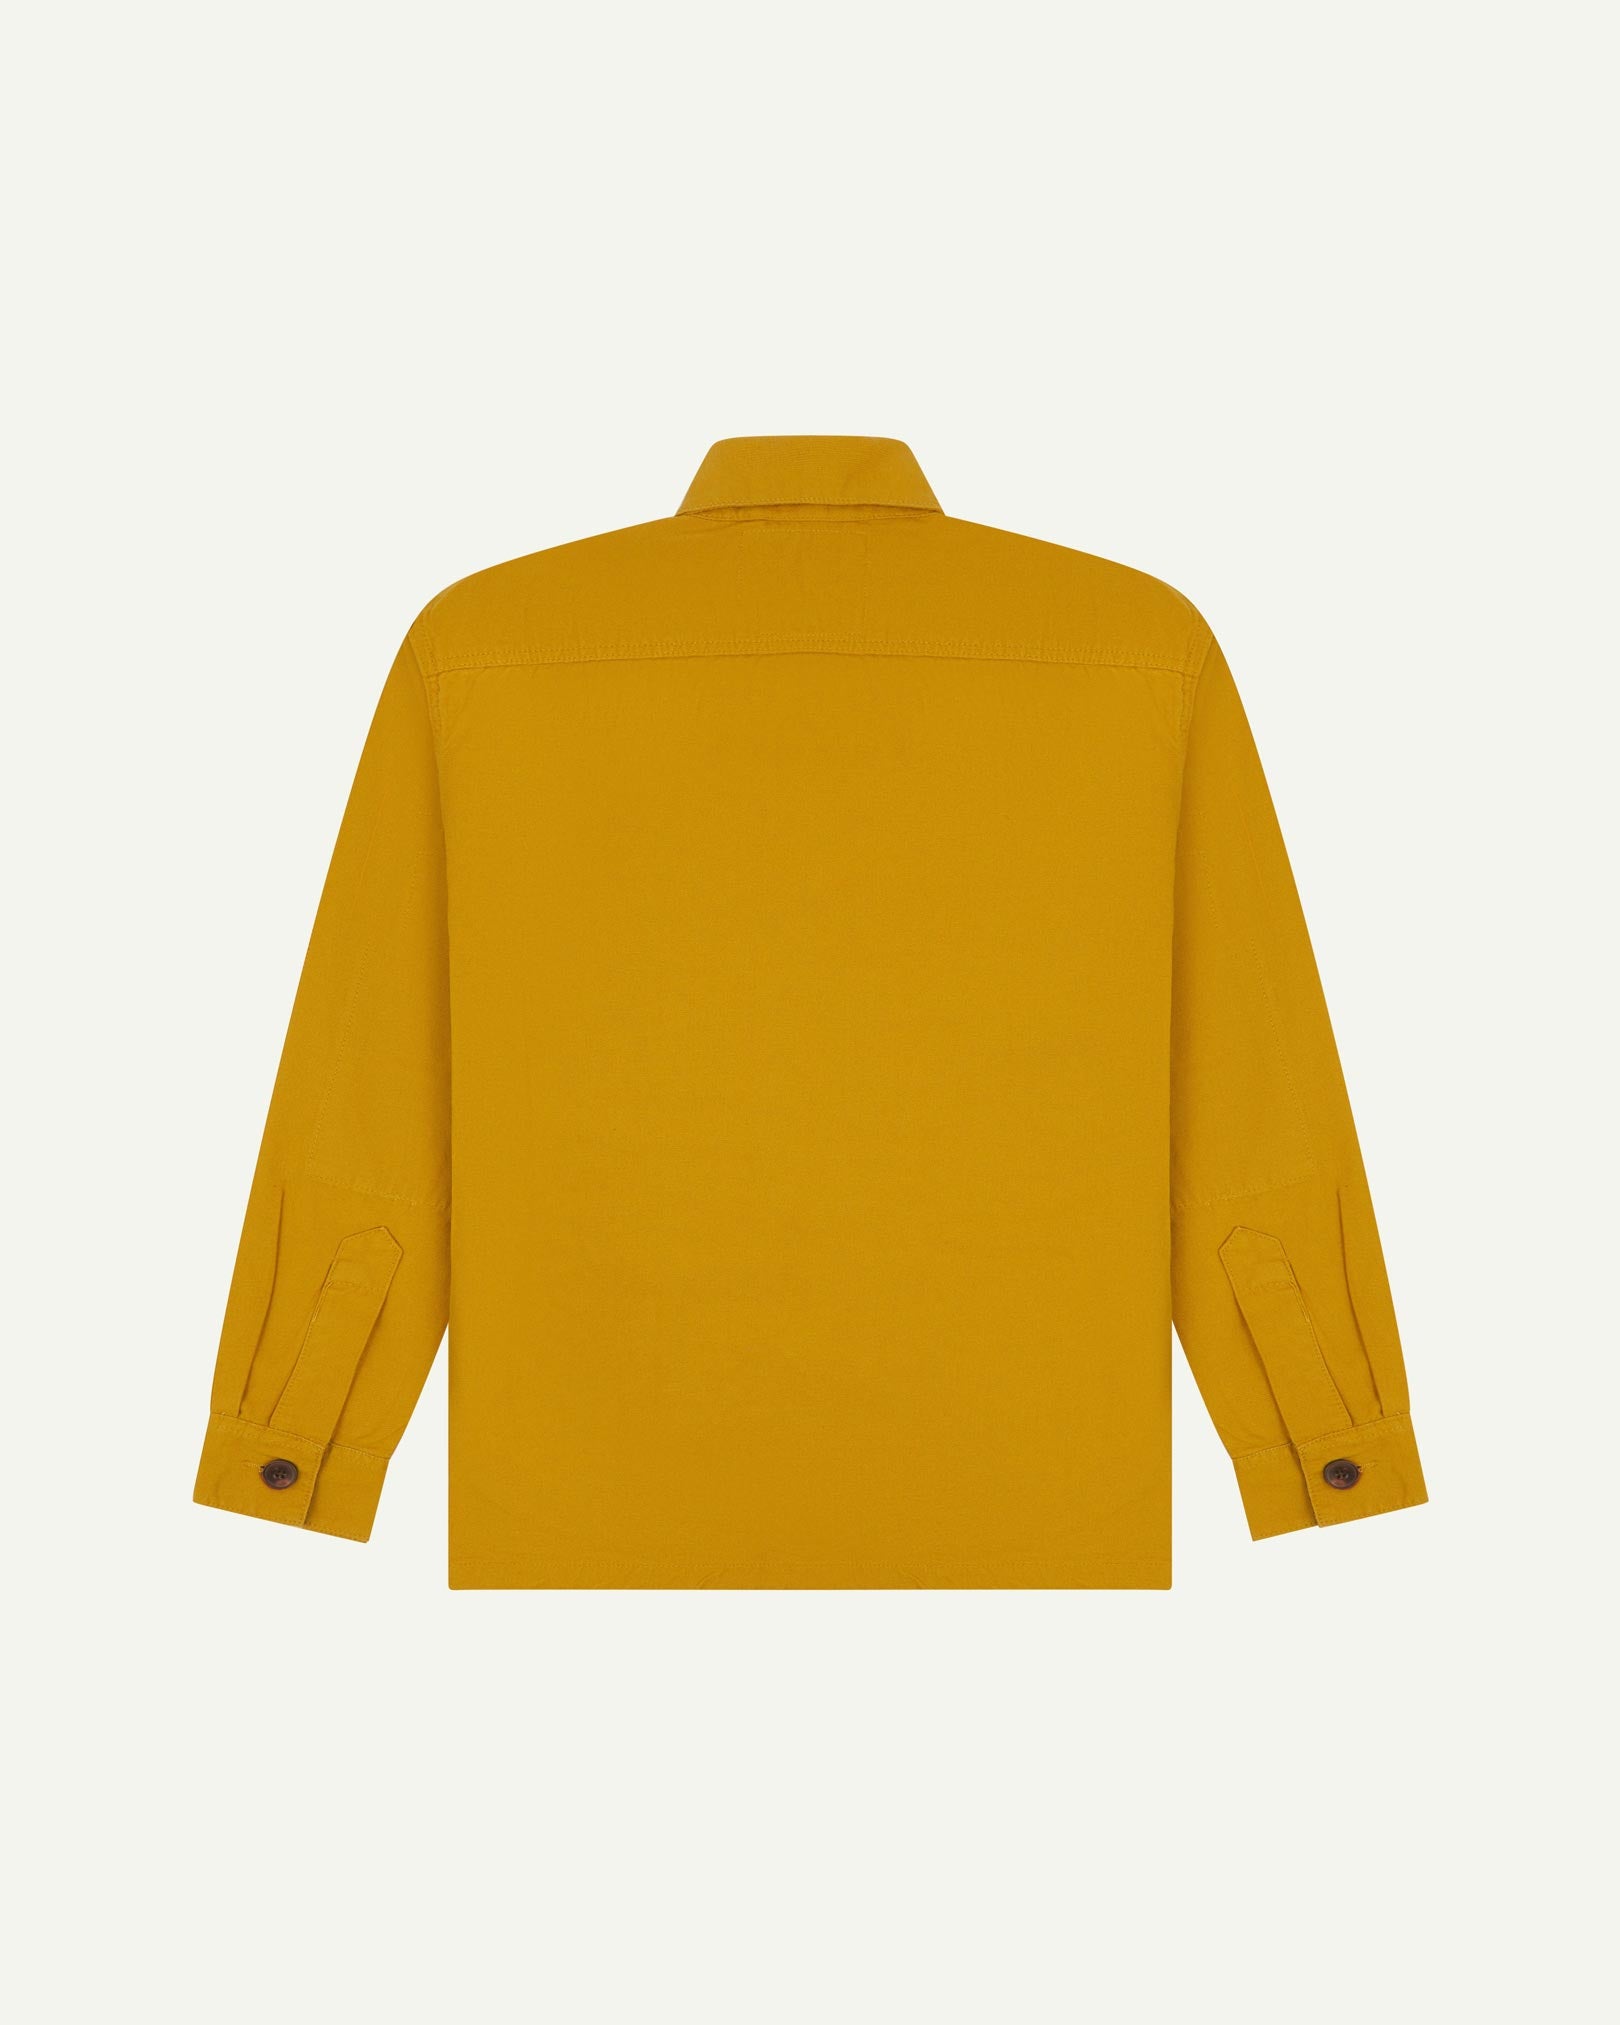 Reverse of yellow buttoned organic cotton workshirt from Uskees showing reinforced elbows, tailored cuffs and boxy silhouette.